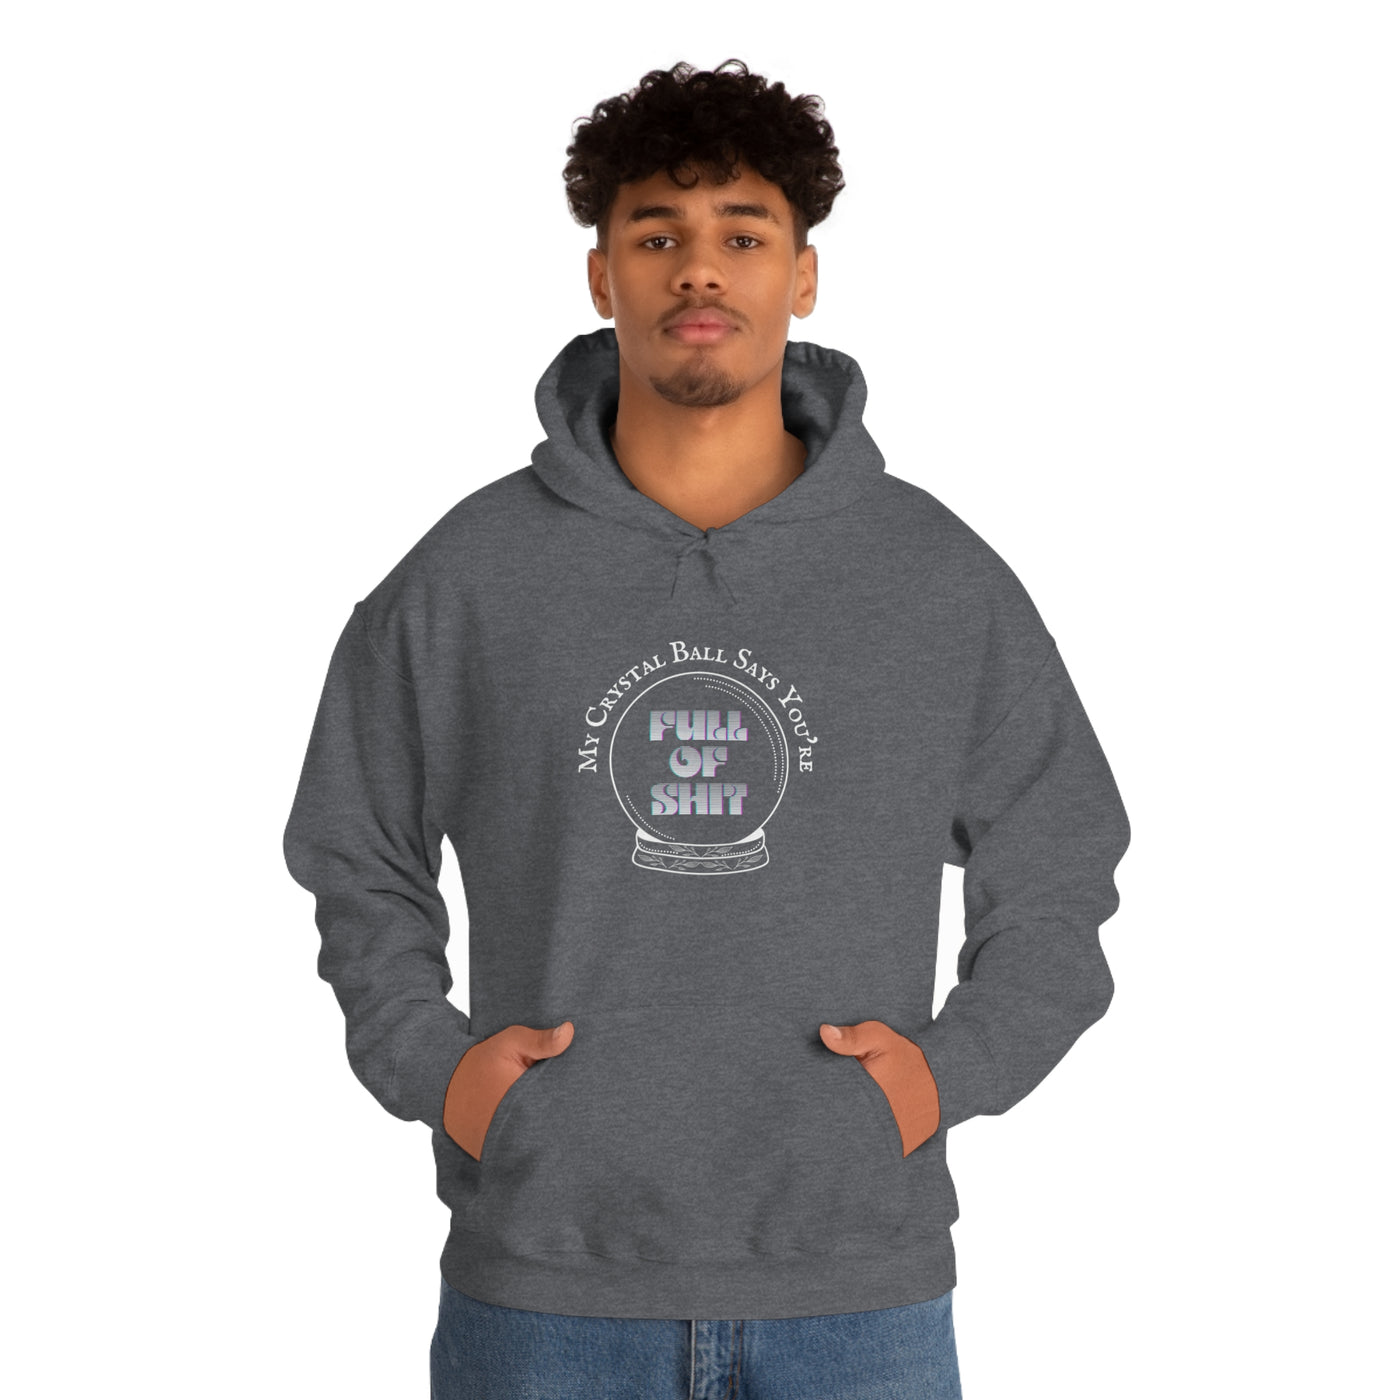 My Crystal Ball Says You're Full of Shit Unisex Hoodie